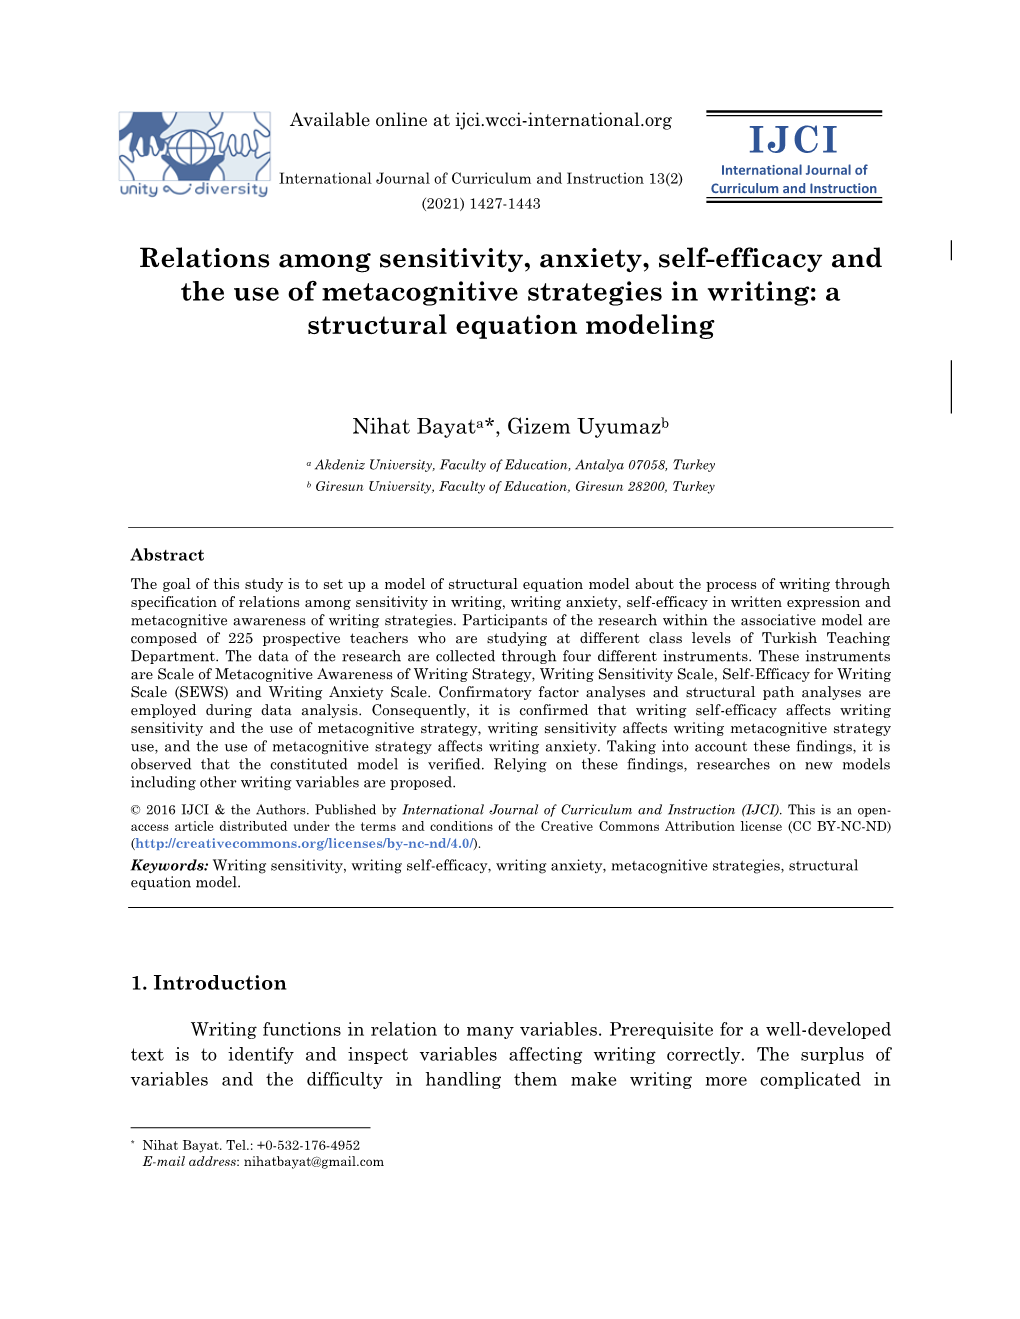 Relations Among Sensitivity, Anxiety, Self-Efficacy and the Use of Metacognitive Strategies in Writing: a Structural Equation Modeling